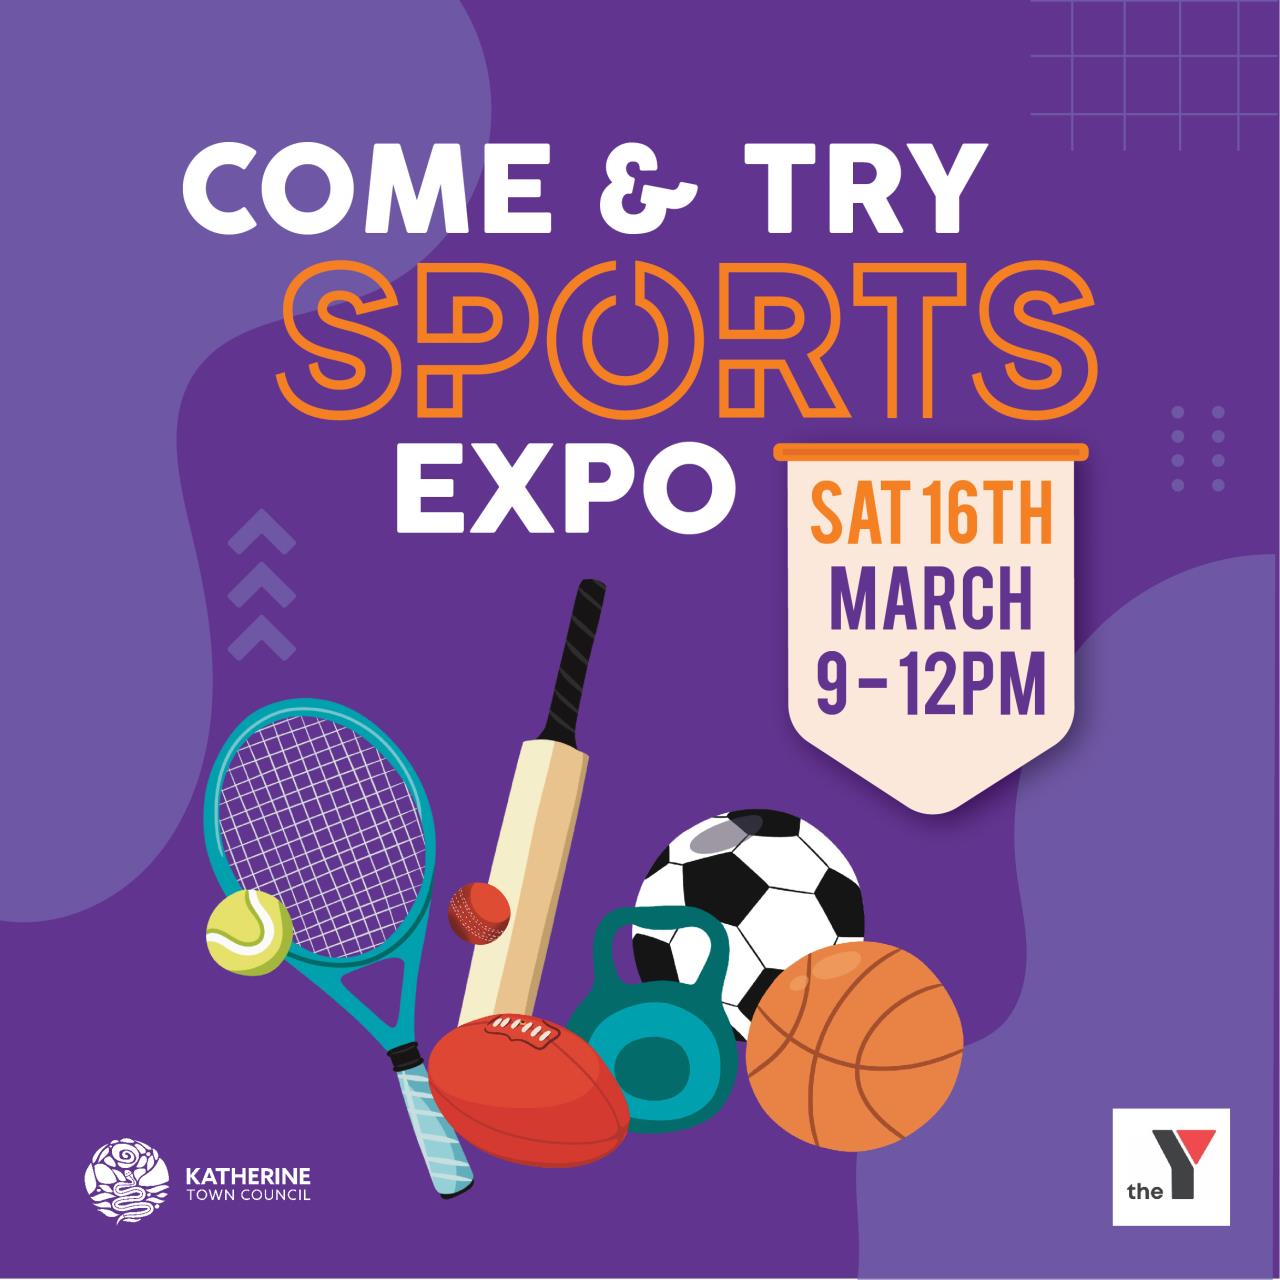 Media Release - Come and Try Sports Expo